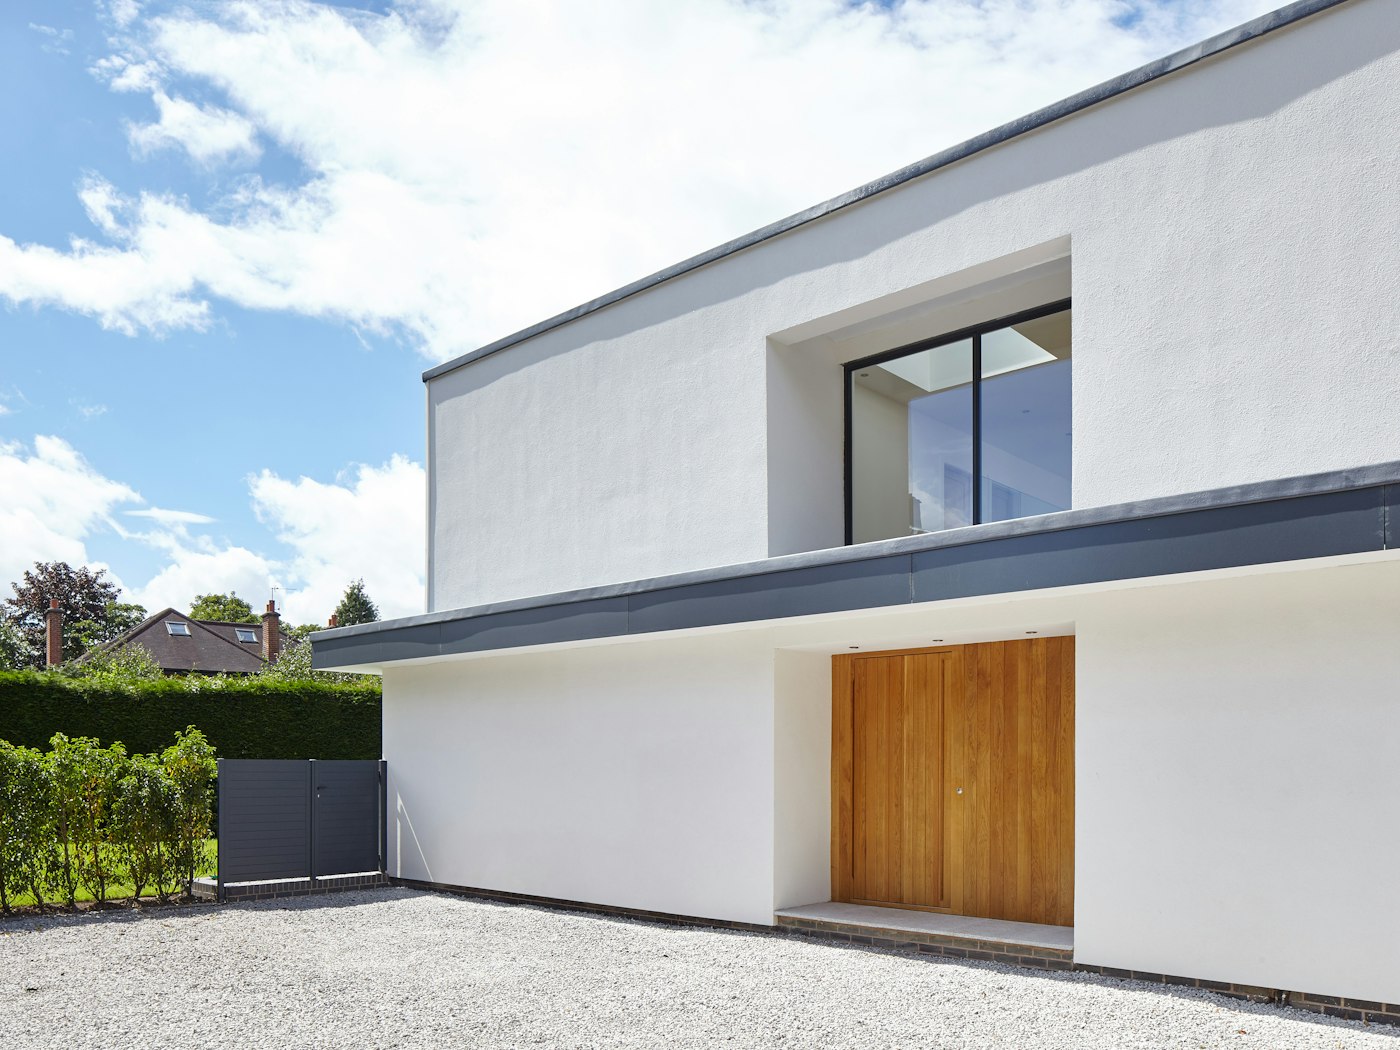 This flat overhang forms a part of the building design and gives excellent coverage to the flush front door